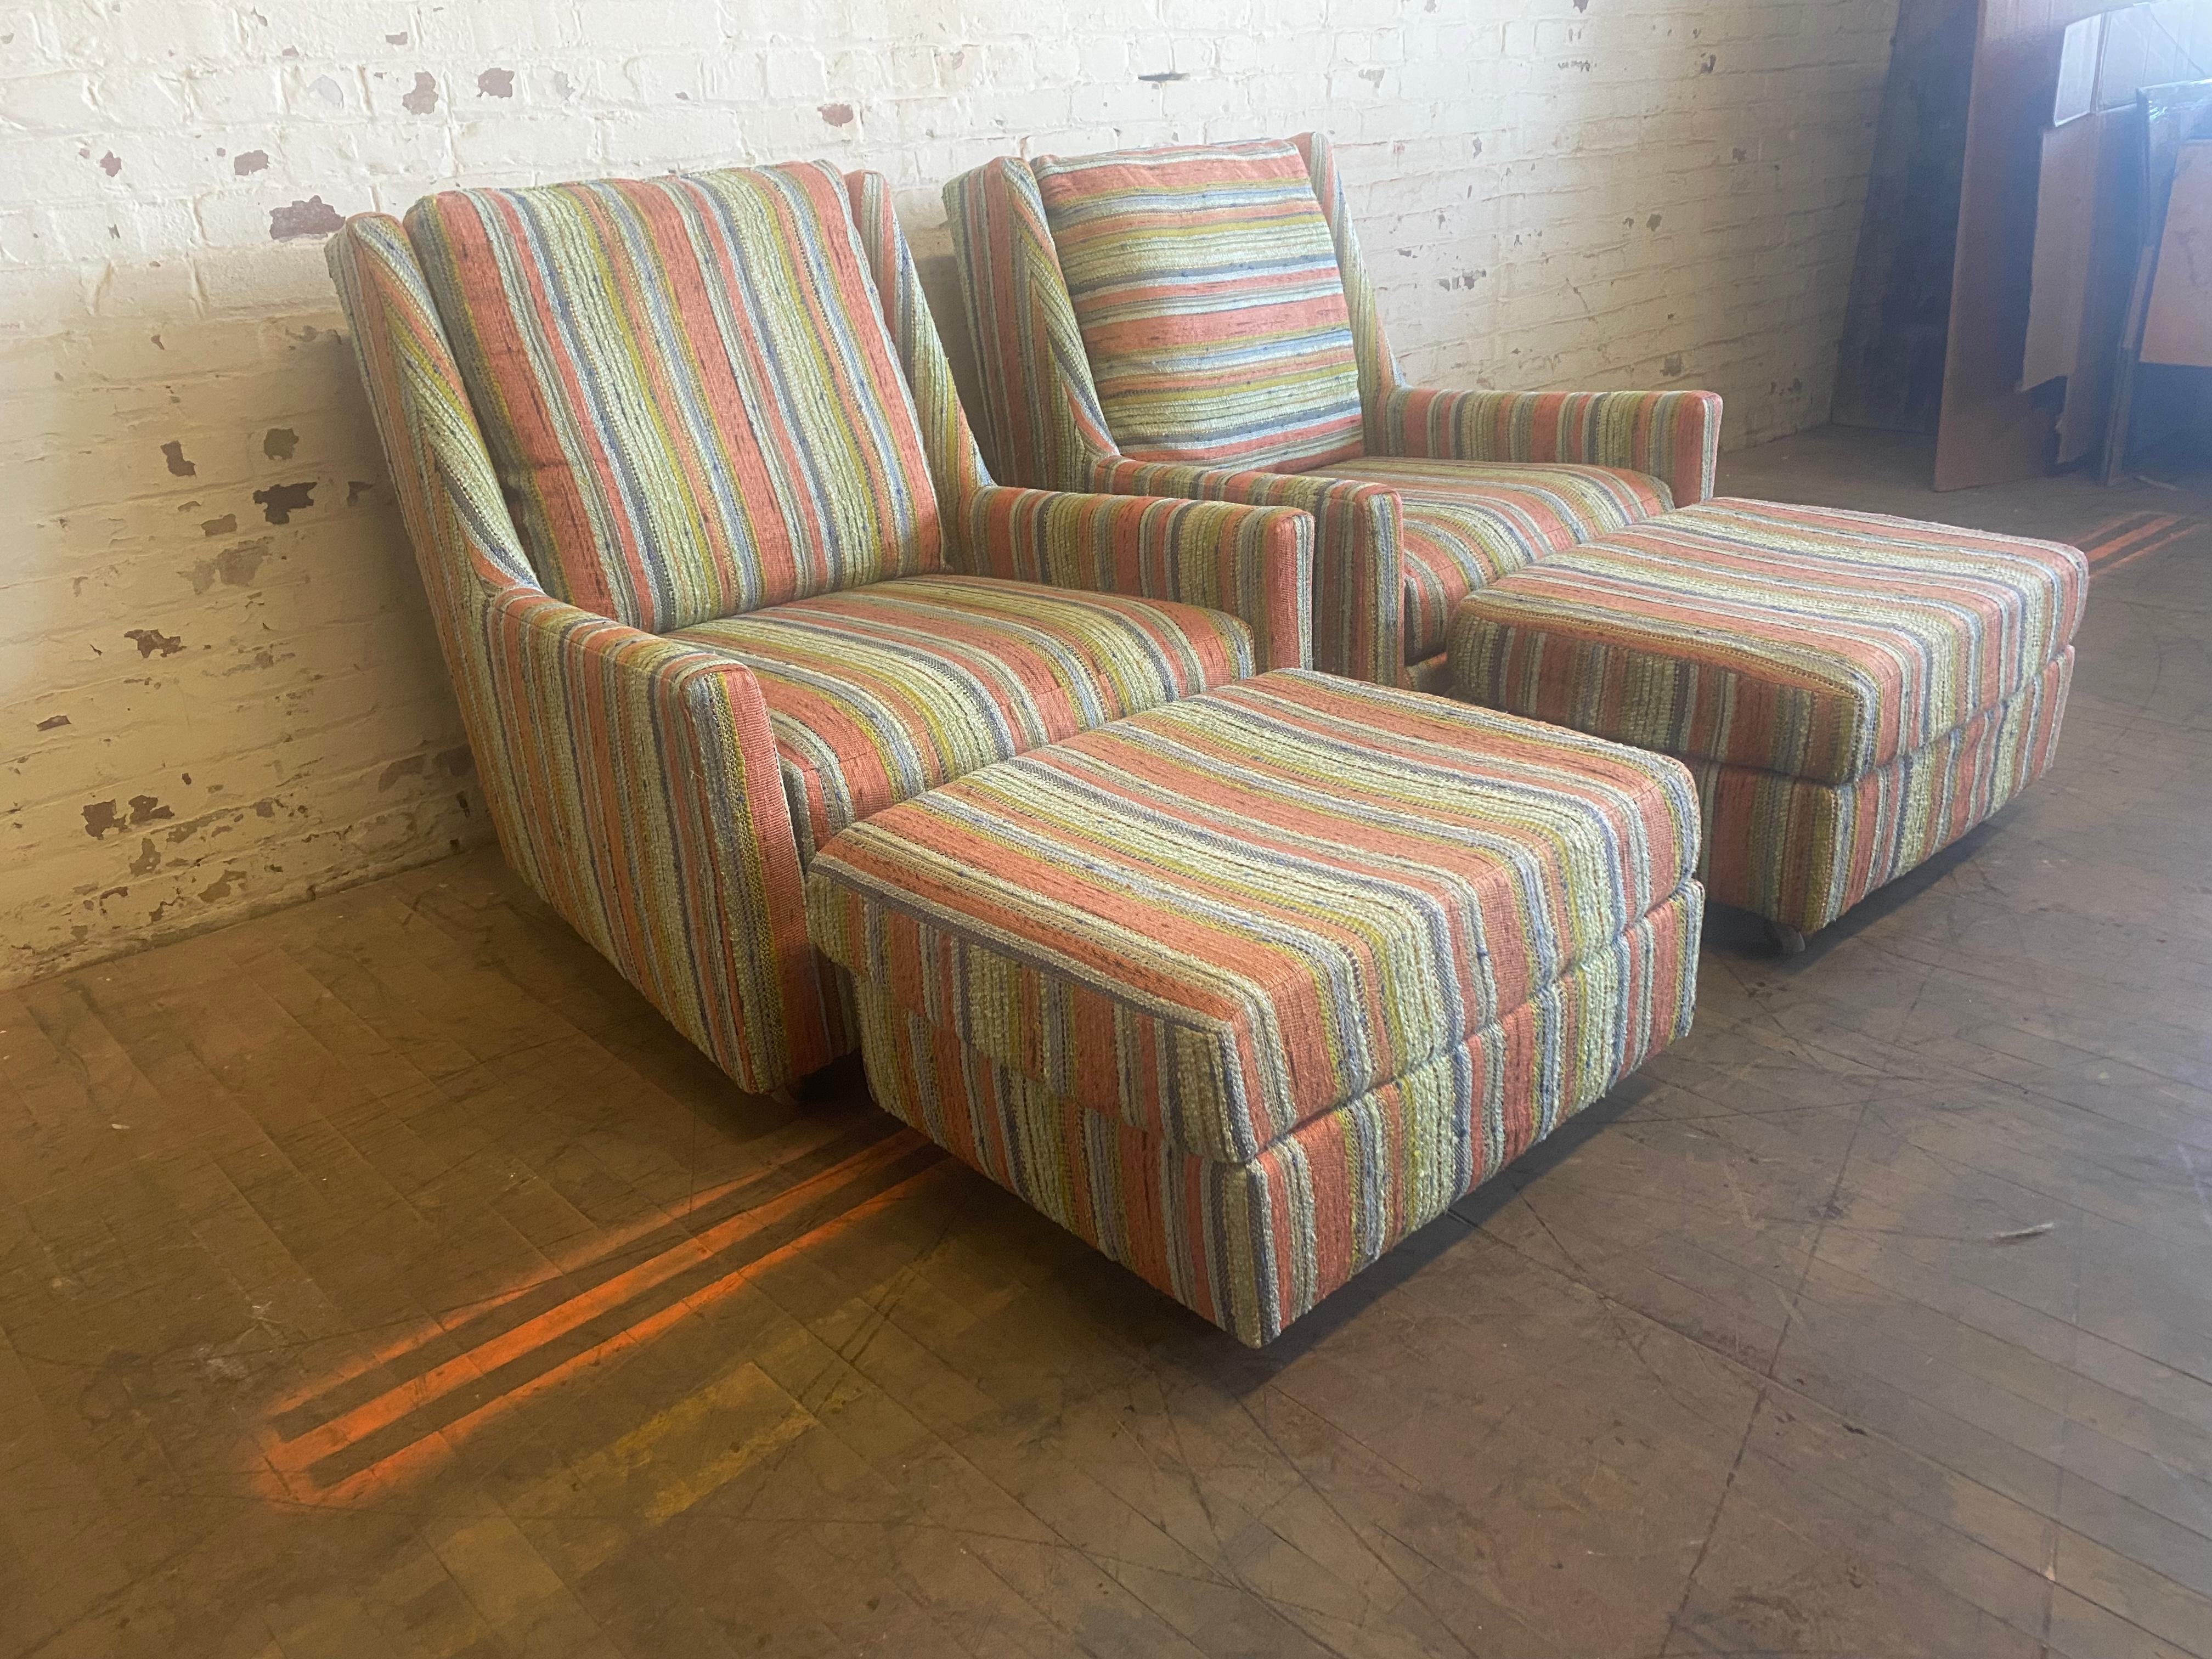 Matched Pair Lounge Chairs/ Ottomans Maharam, Alexander Girard Stripe Fabric In Good Condition For Sale In Buffalo, NY